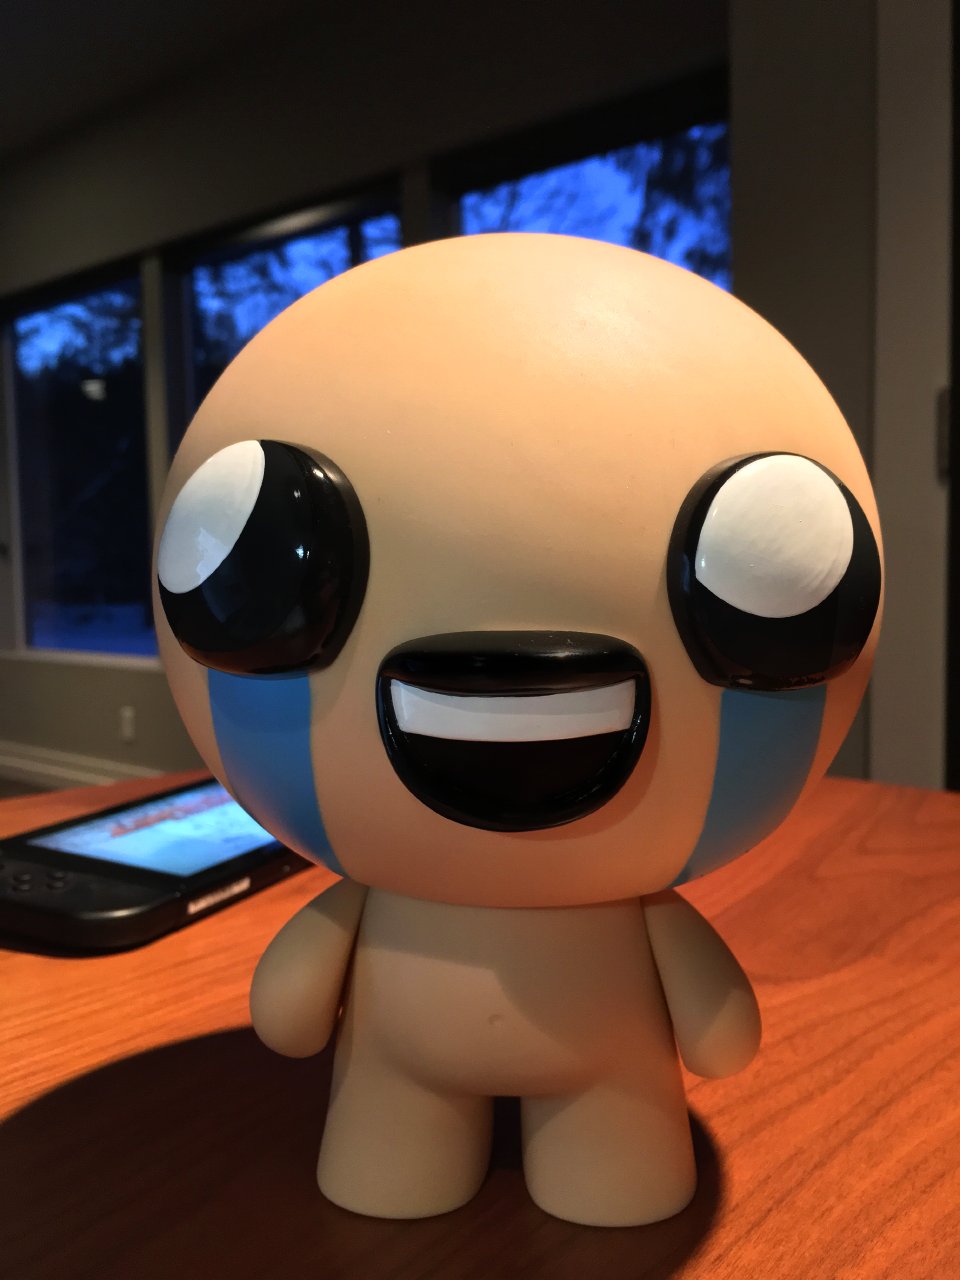 Binding of Isaac Afterbirth + sur Switch